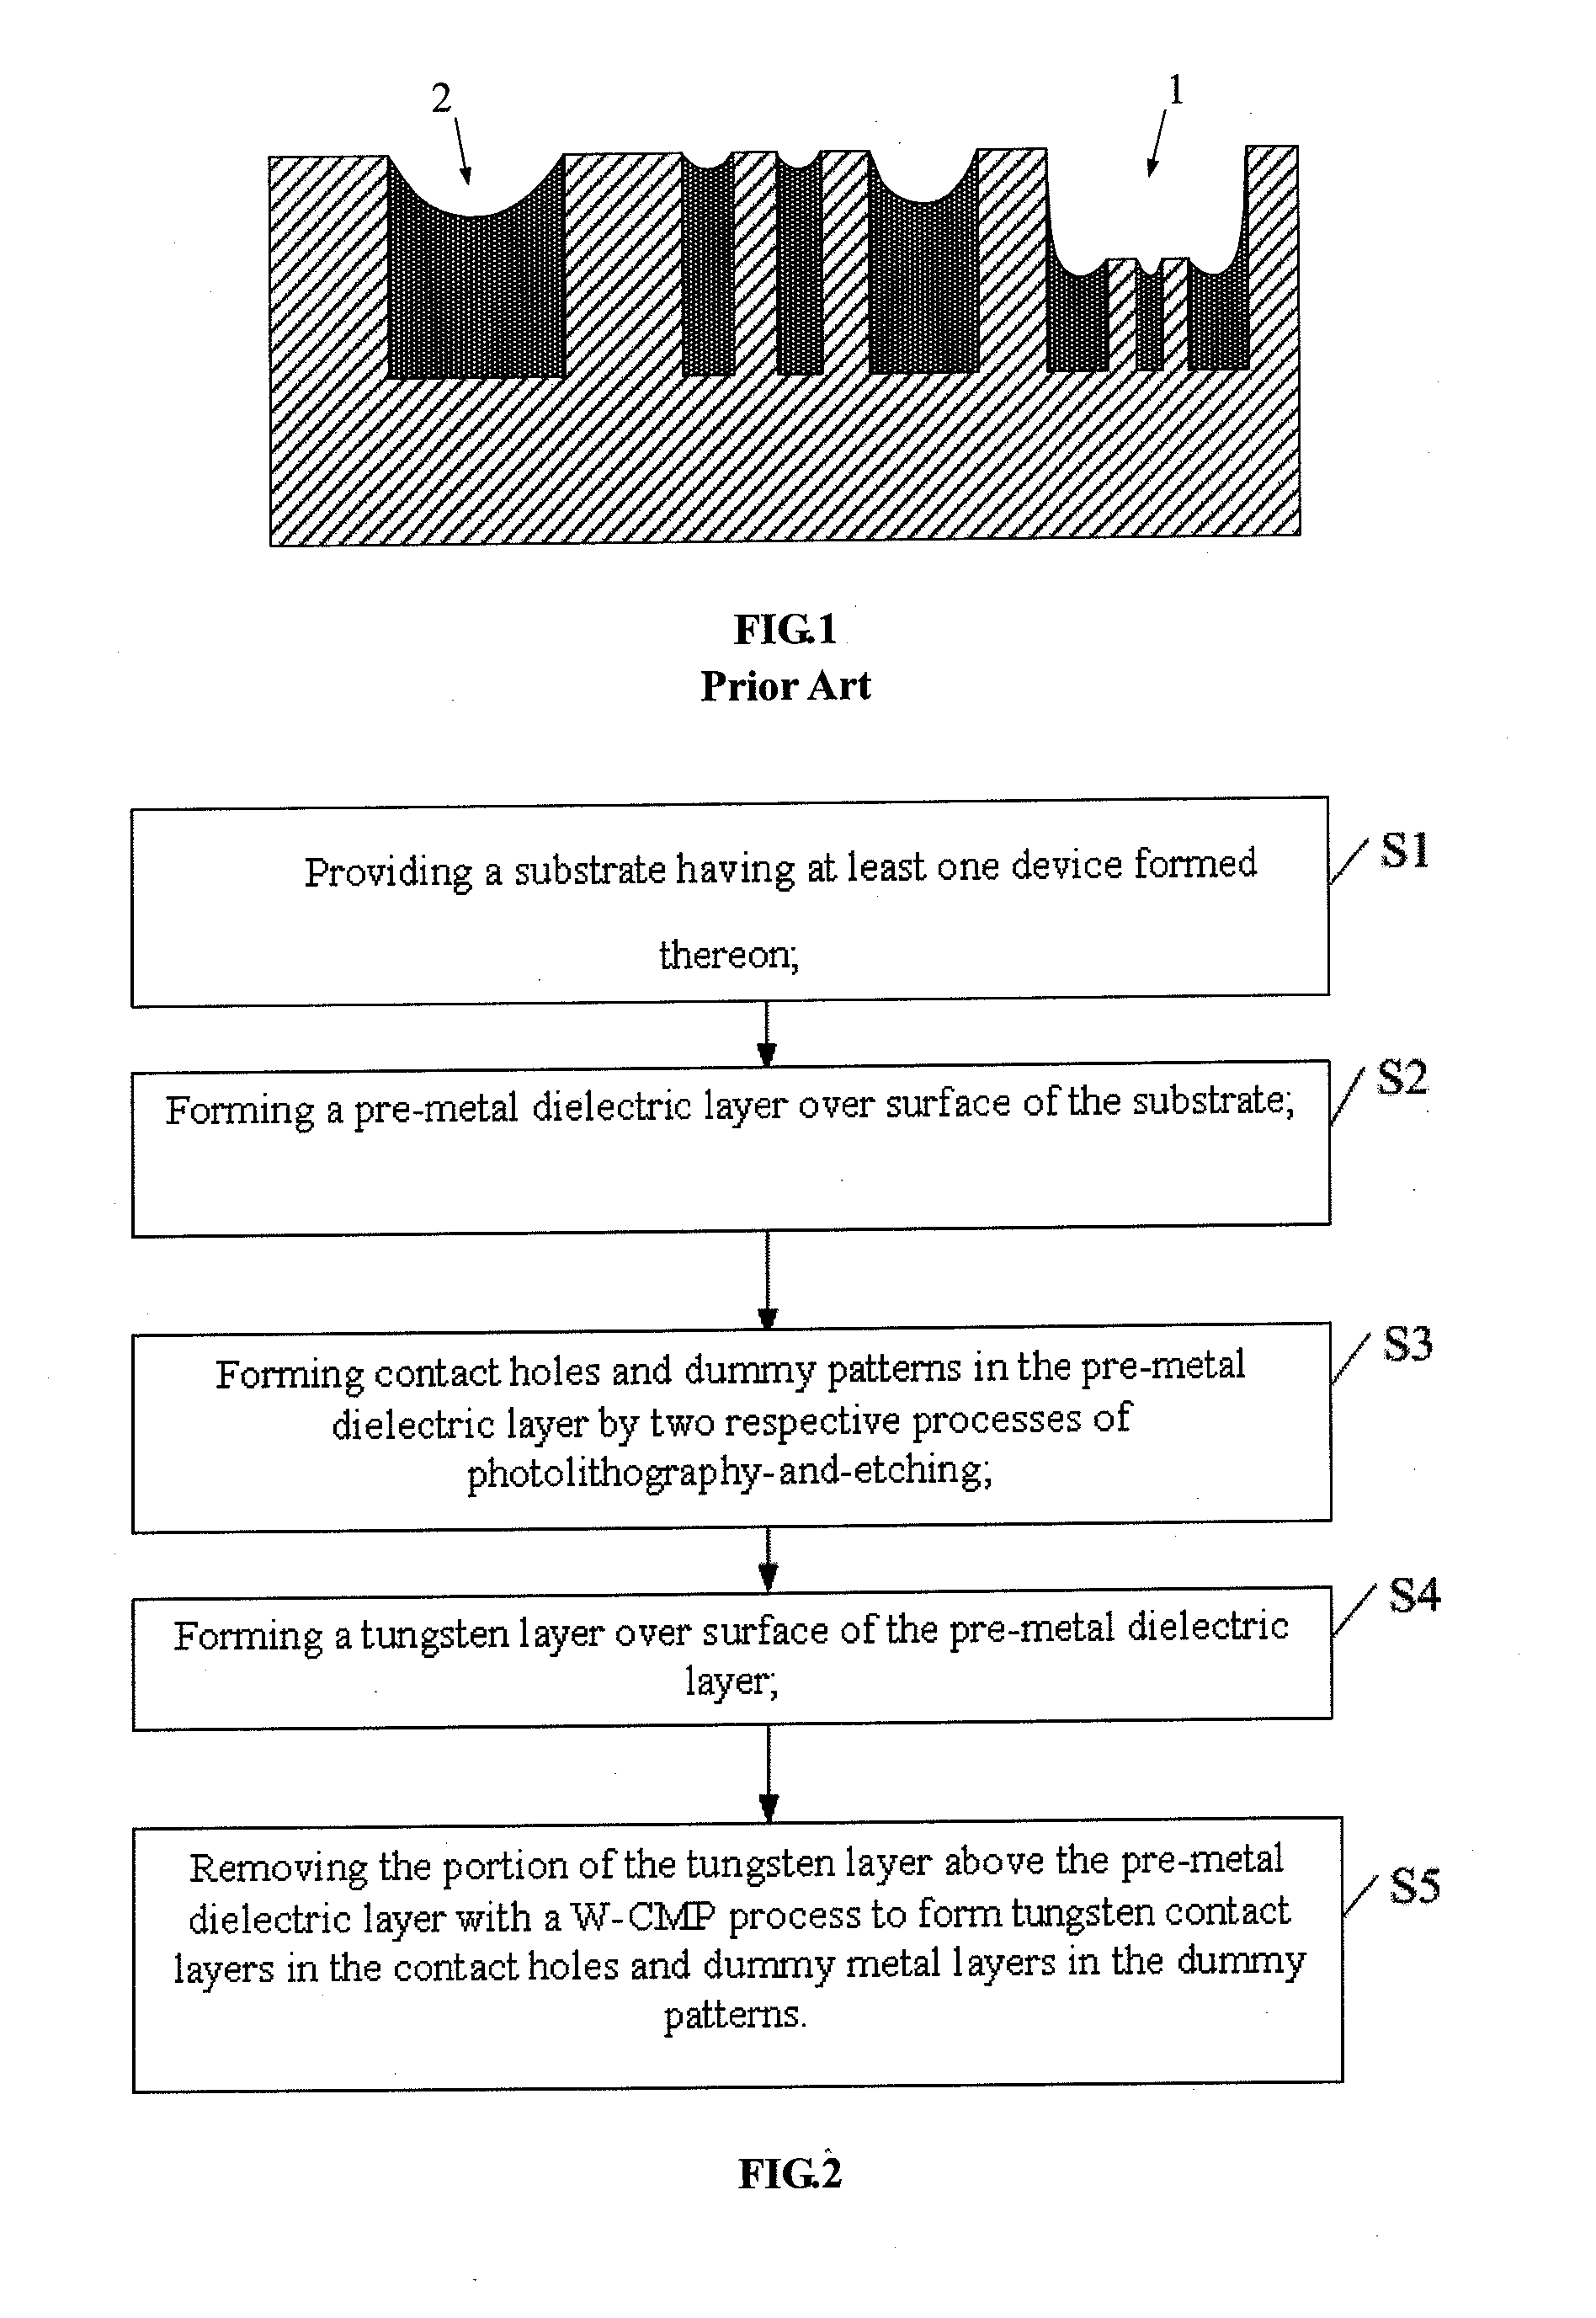 Fabrication method for improving surface planarity after tungsten chemical mechanical polishing